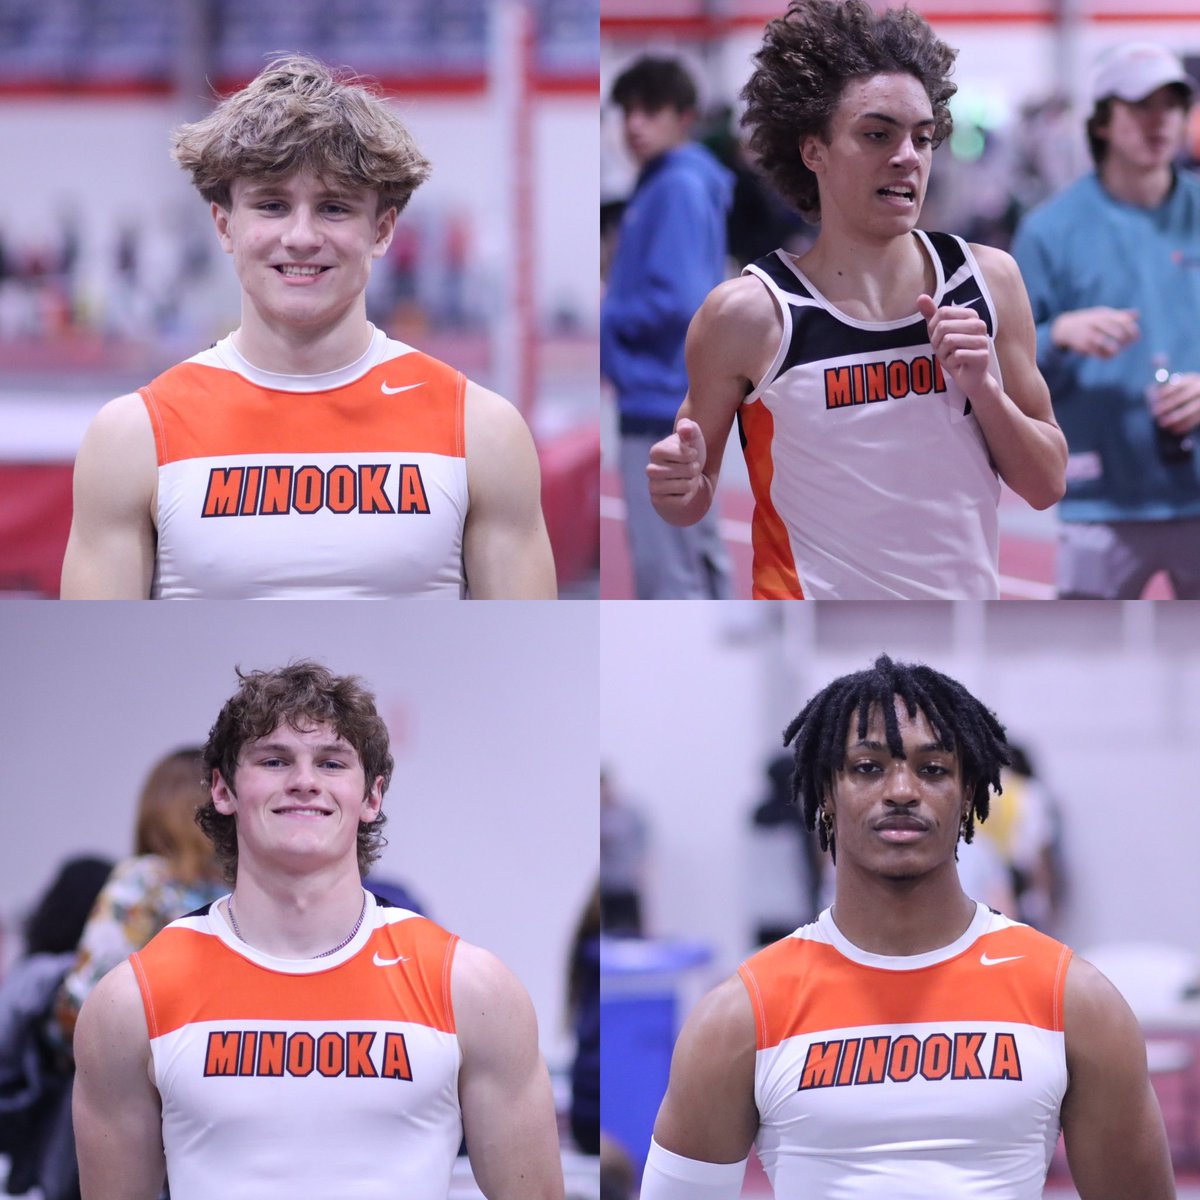 Fr/So & Varsity Indoor Record Boards are officially updated. Two Fr/So & two Varsity Records changed. Congrats to Cooper Bowman (PV), Nico Cimino (3200), Nate George (55), & Dejay Smith (55 HH)! #SmithStrong docs.google.com/spreadsheets/d…